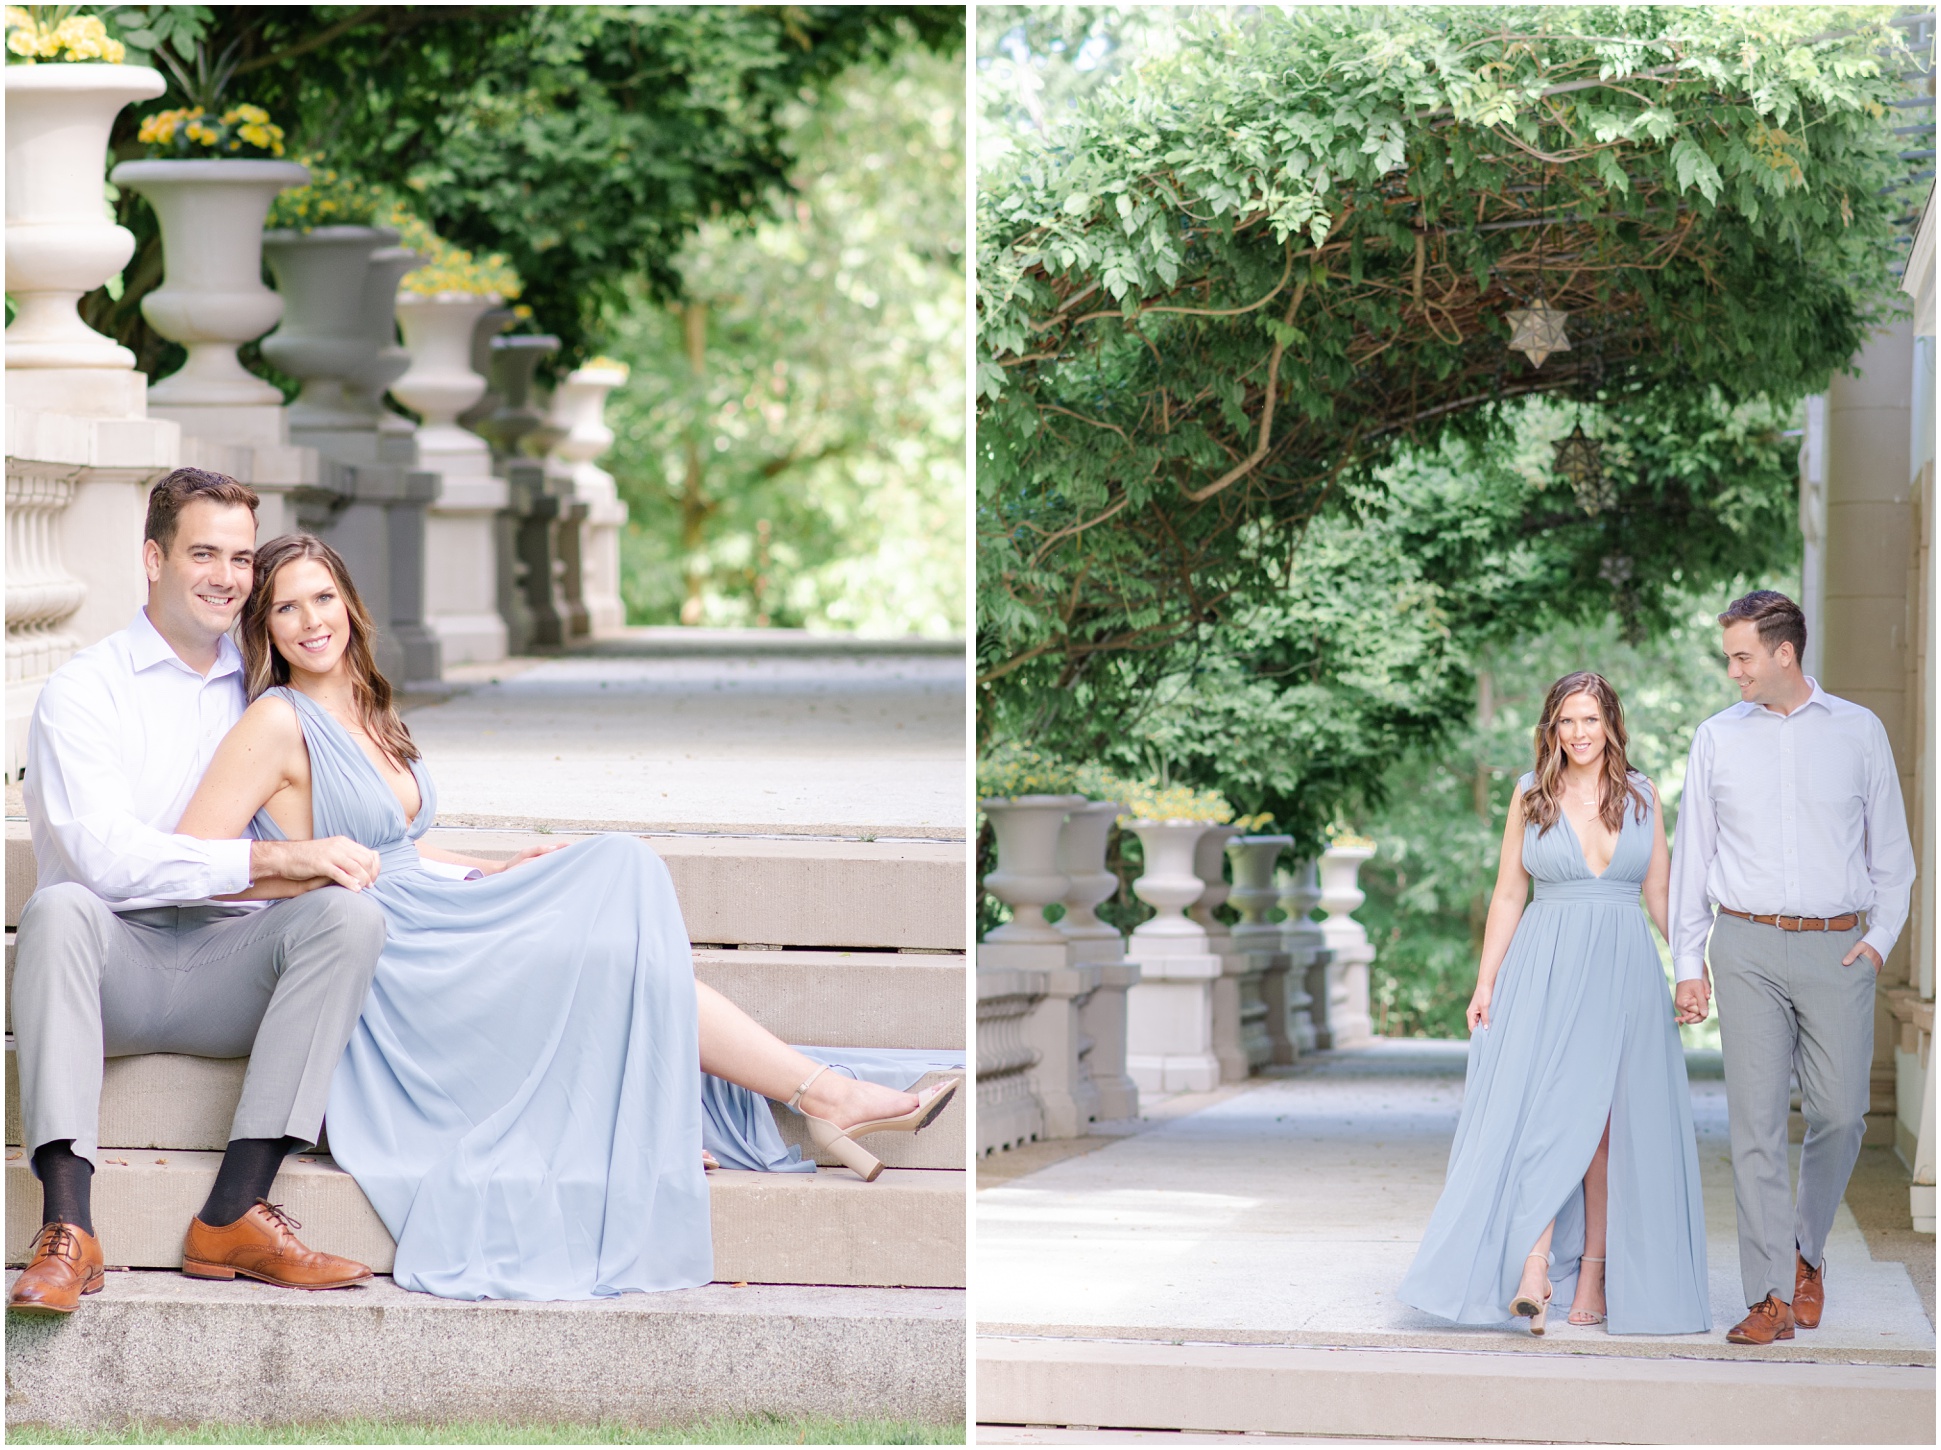 Two Images of Angela and Jeff on the stairs of the mansion. Angela wearing a baby blue dress.